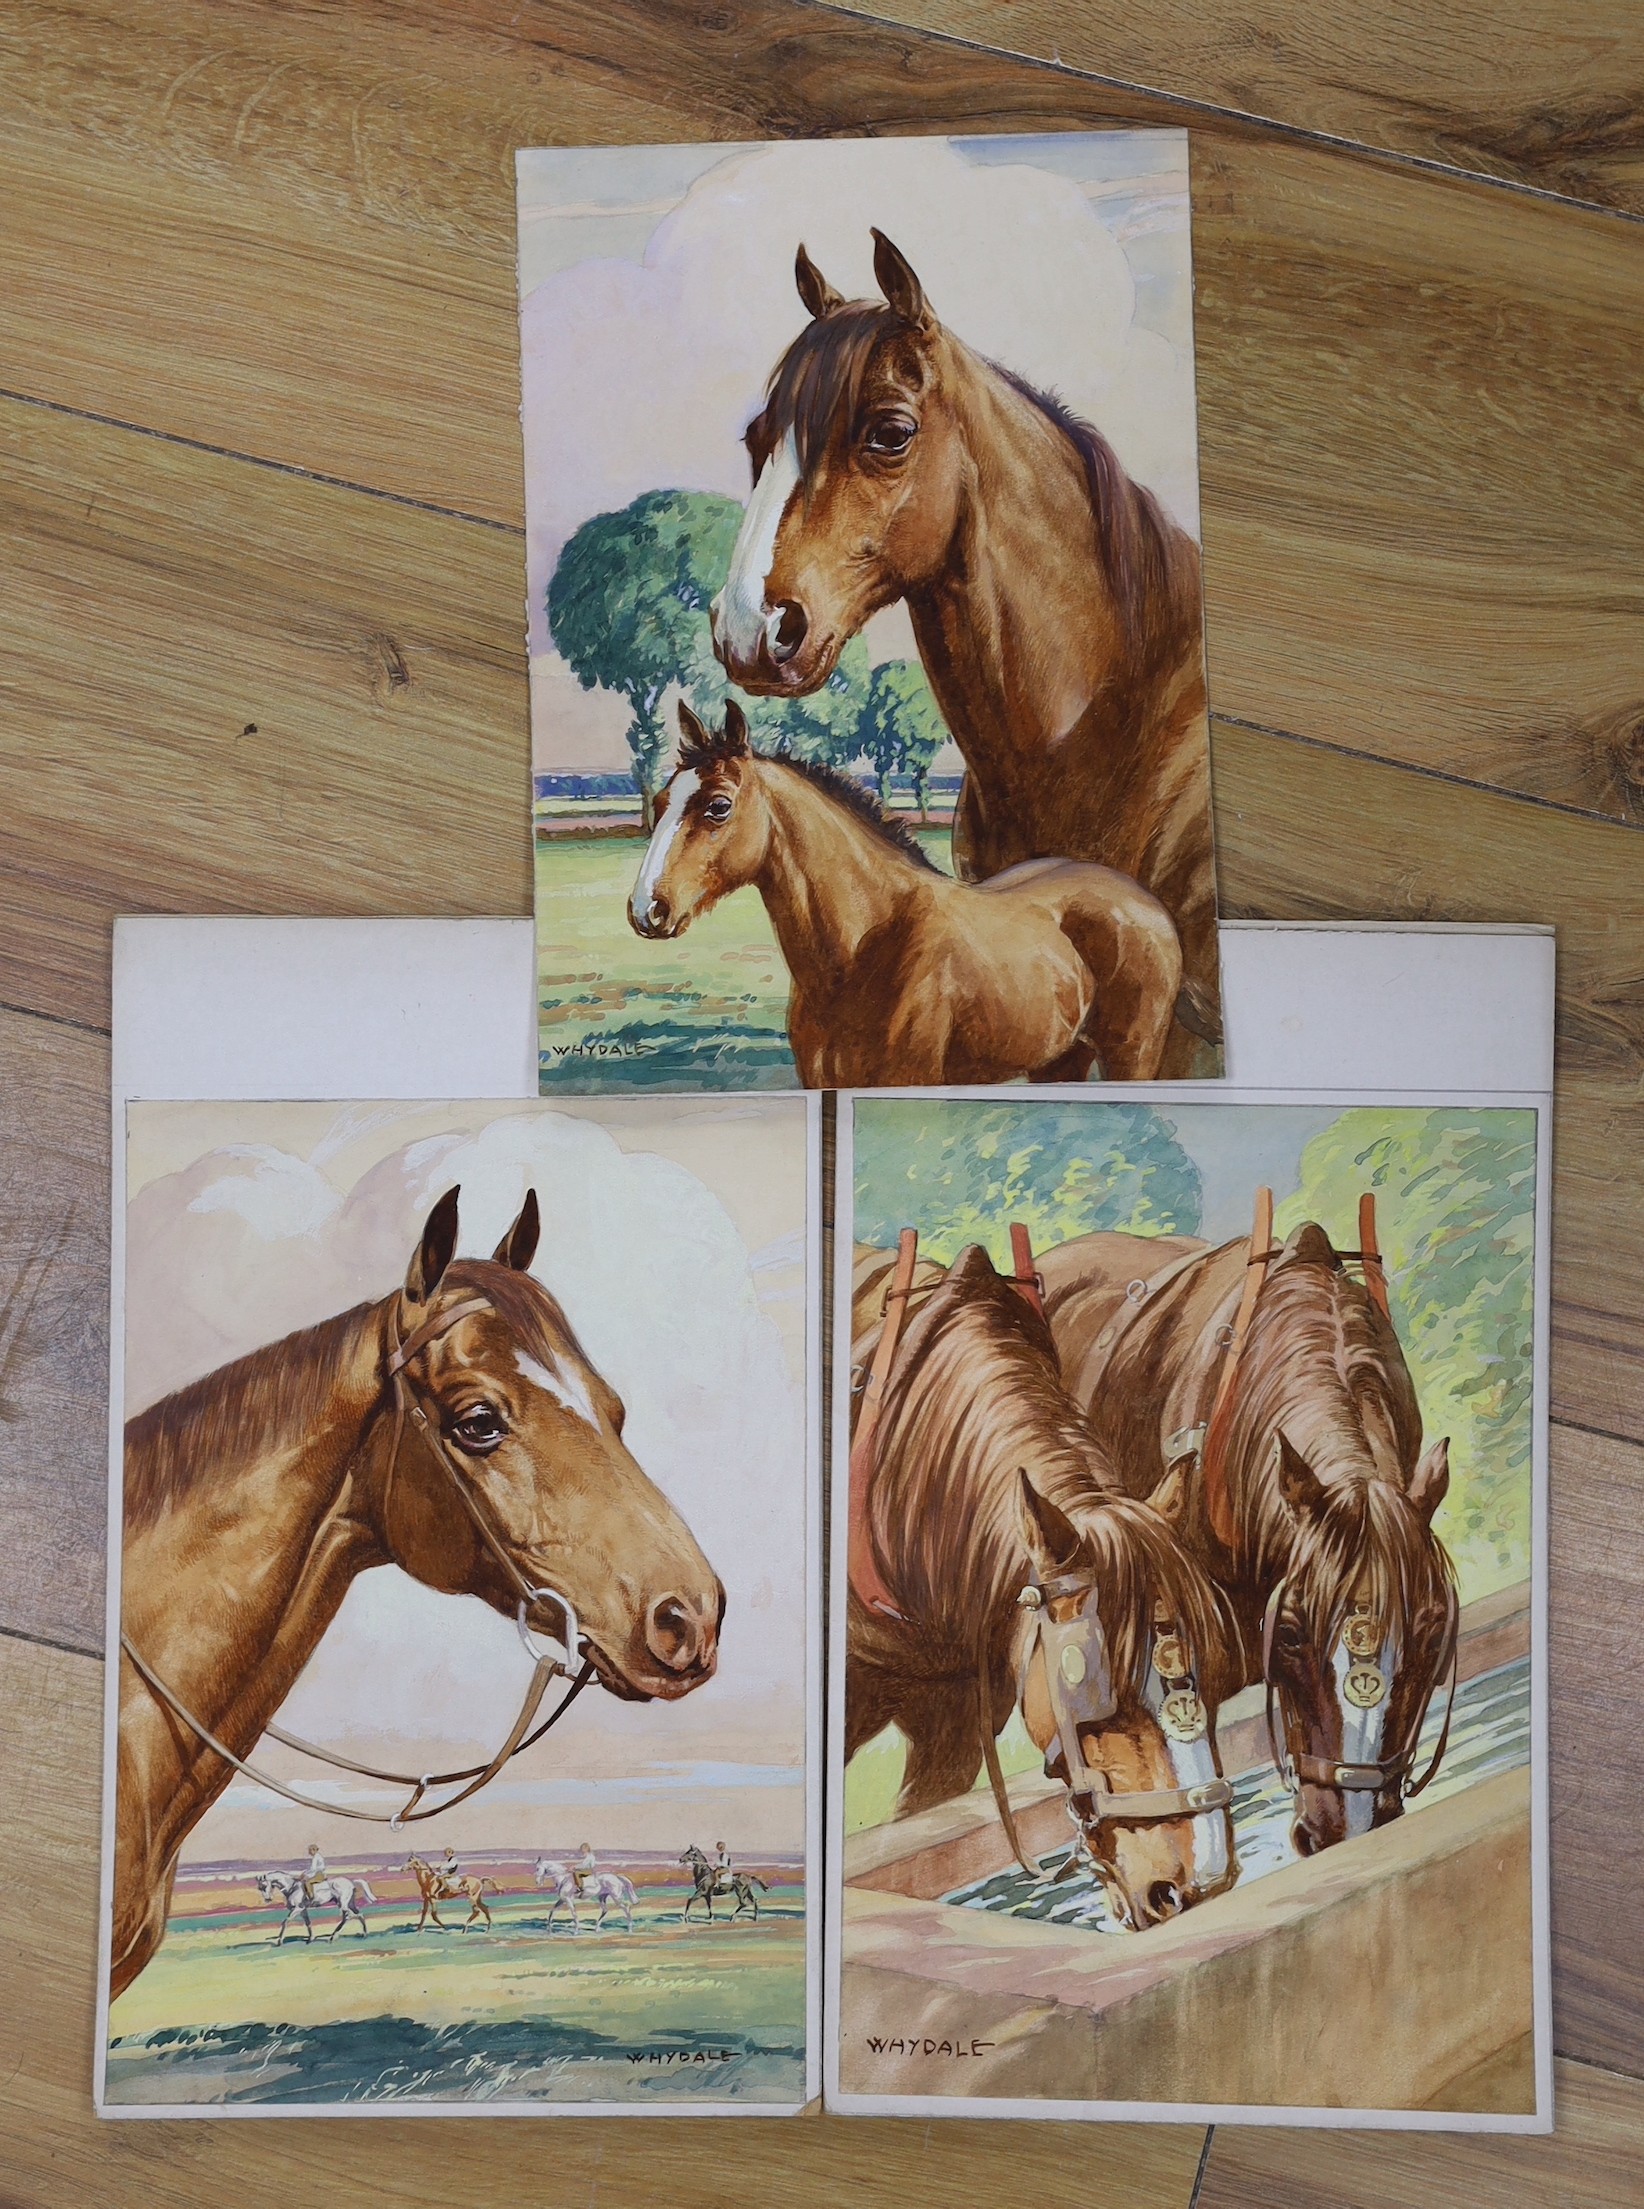 Ernest Whydale (1886-1952), three watercolours, Studies of horses, signed, 26 x 18cm, unframed